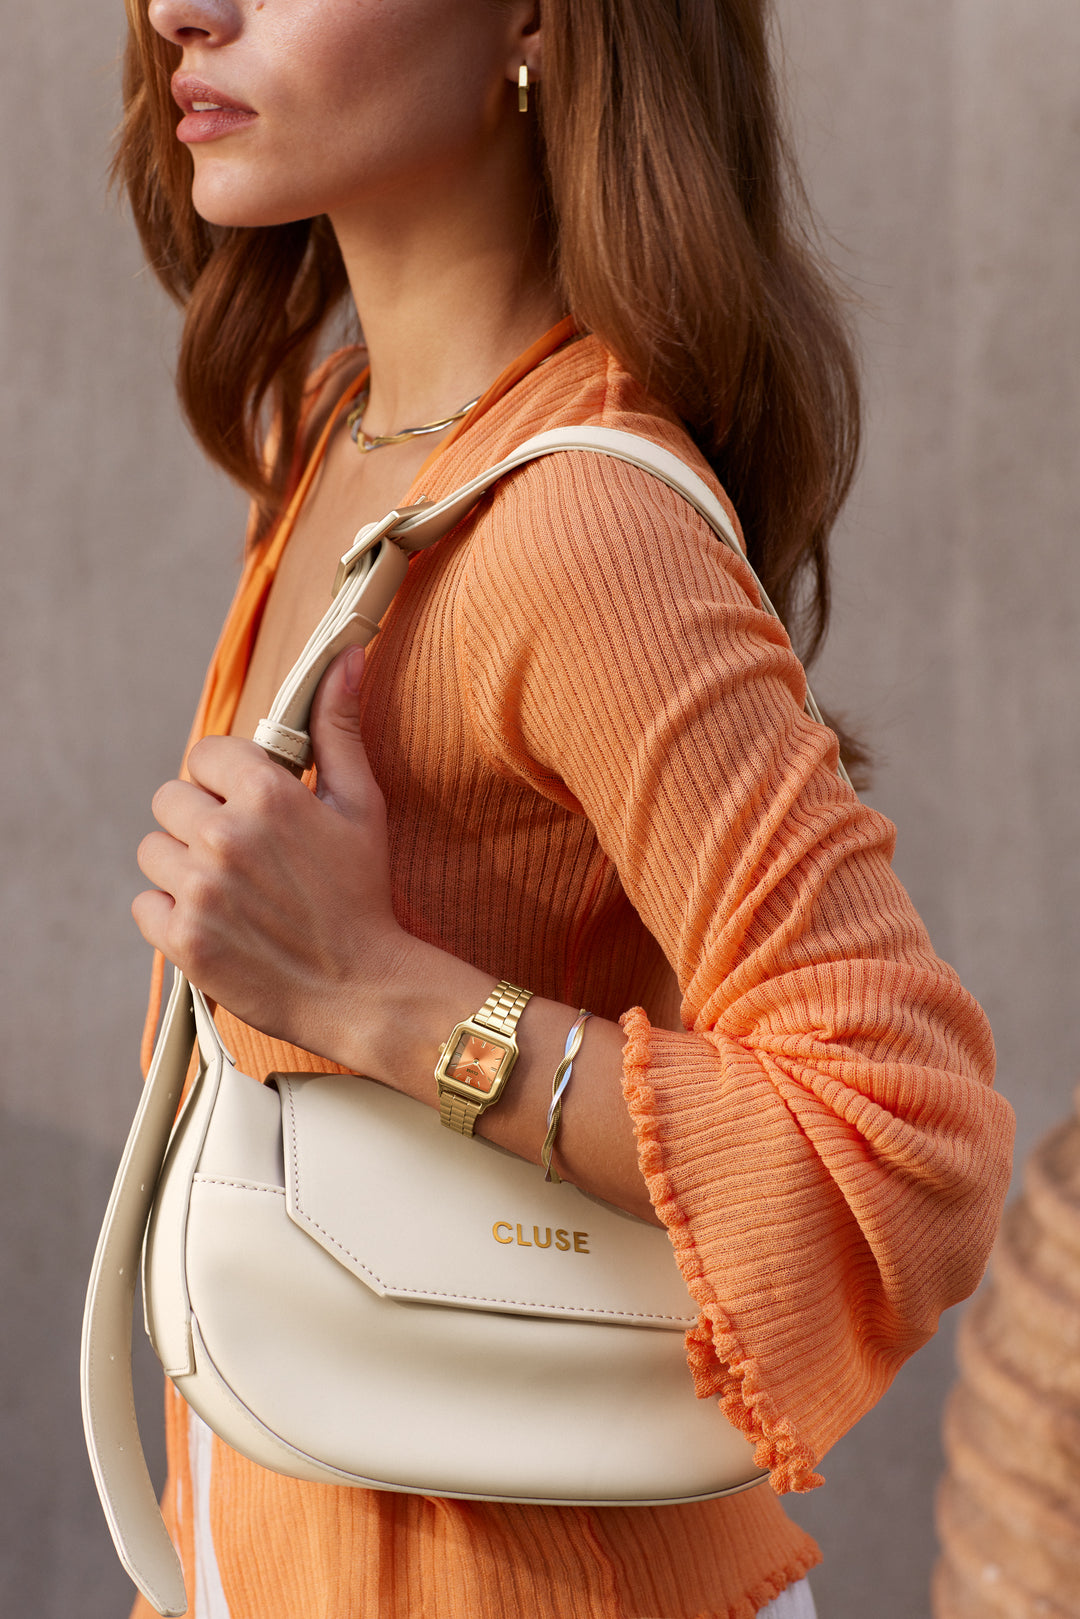 CLUSE watch and crossbody bag